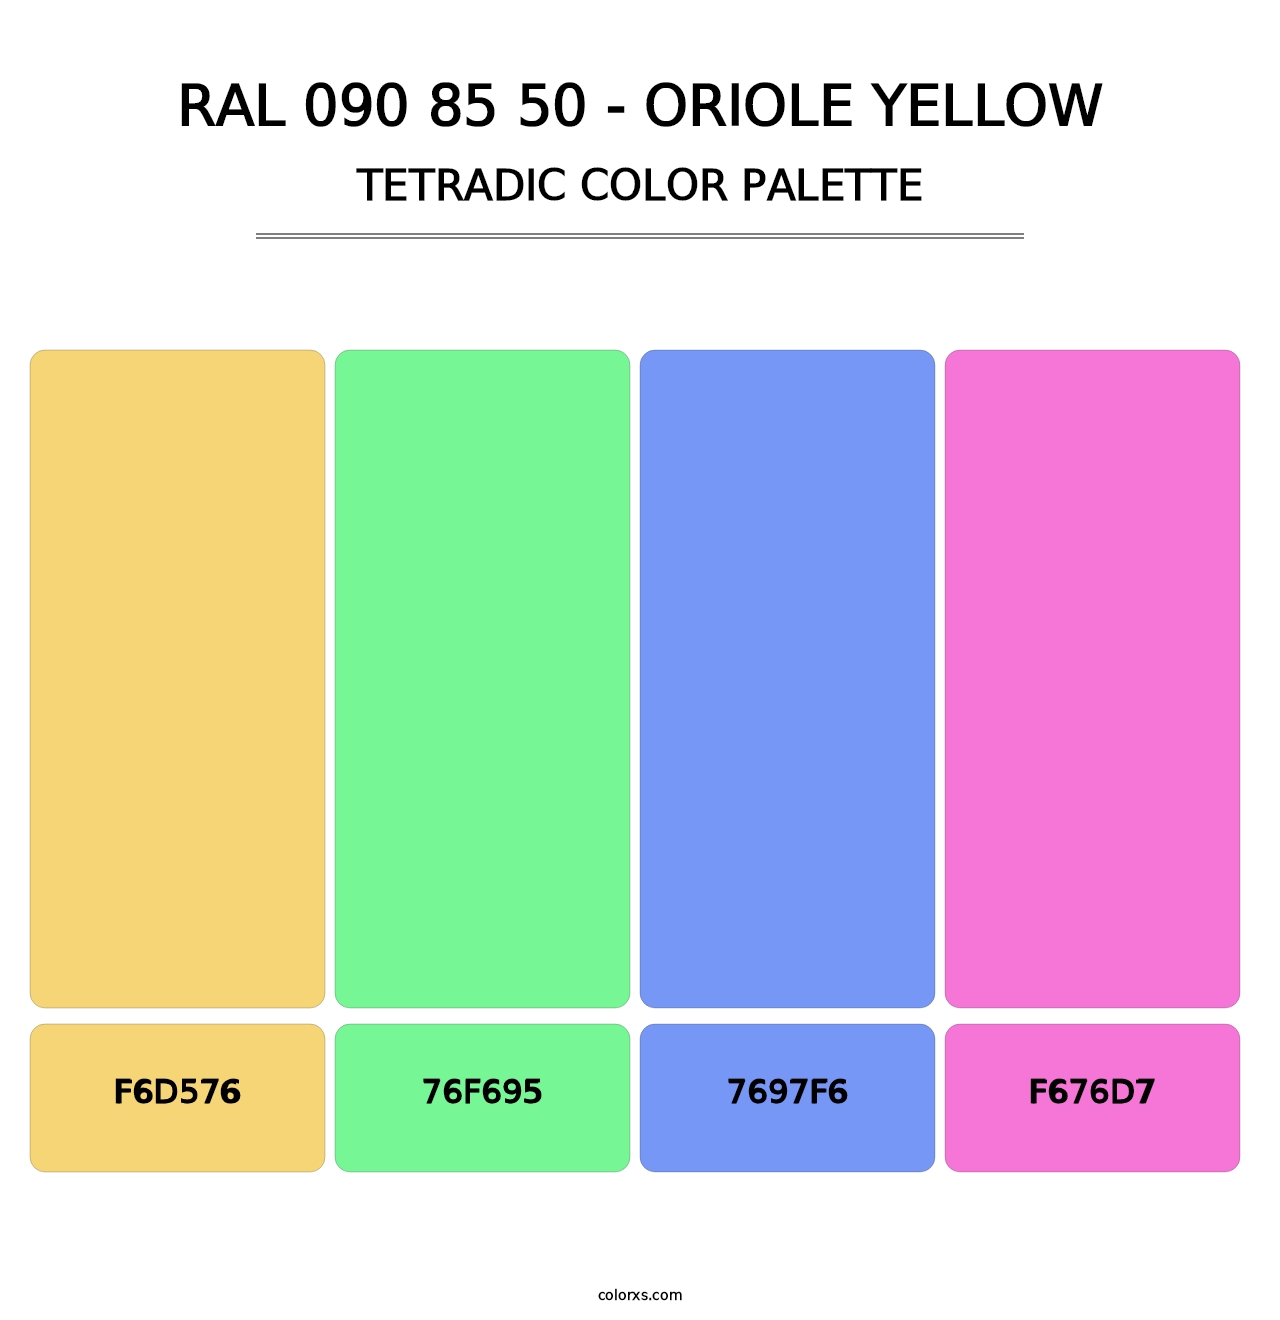 RAL 090 85 50 - Oriole Yellow - Tetradic Color Palette